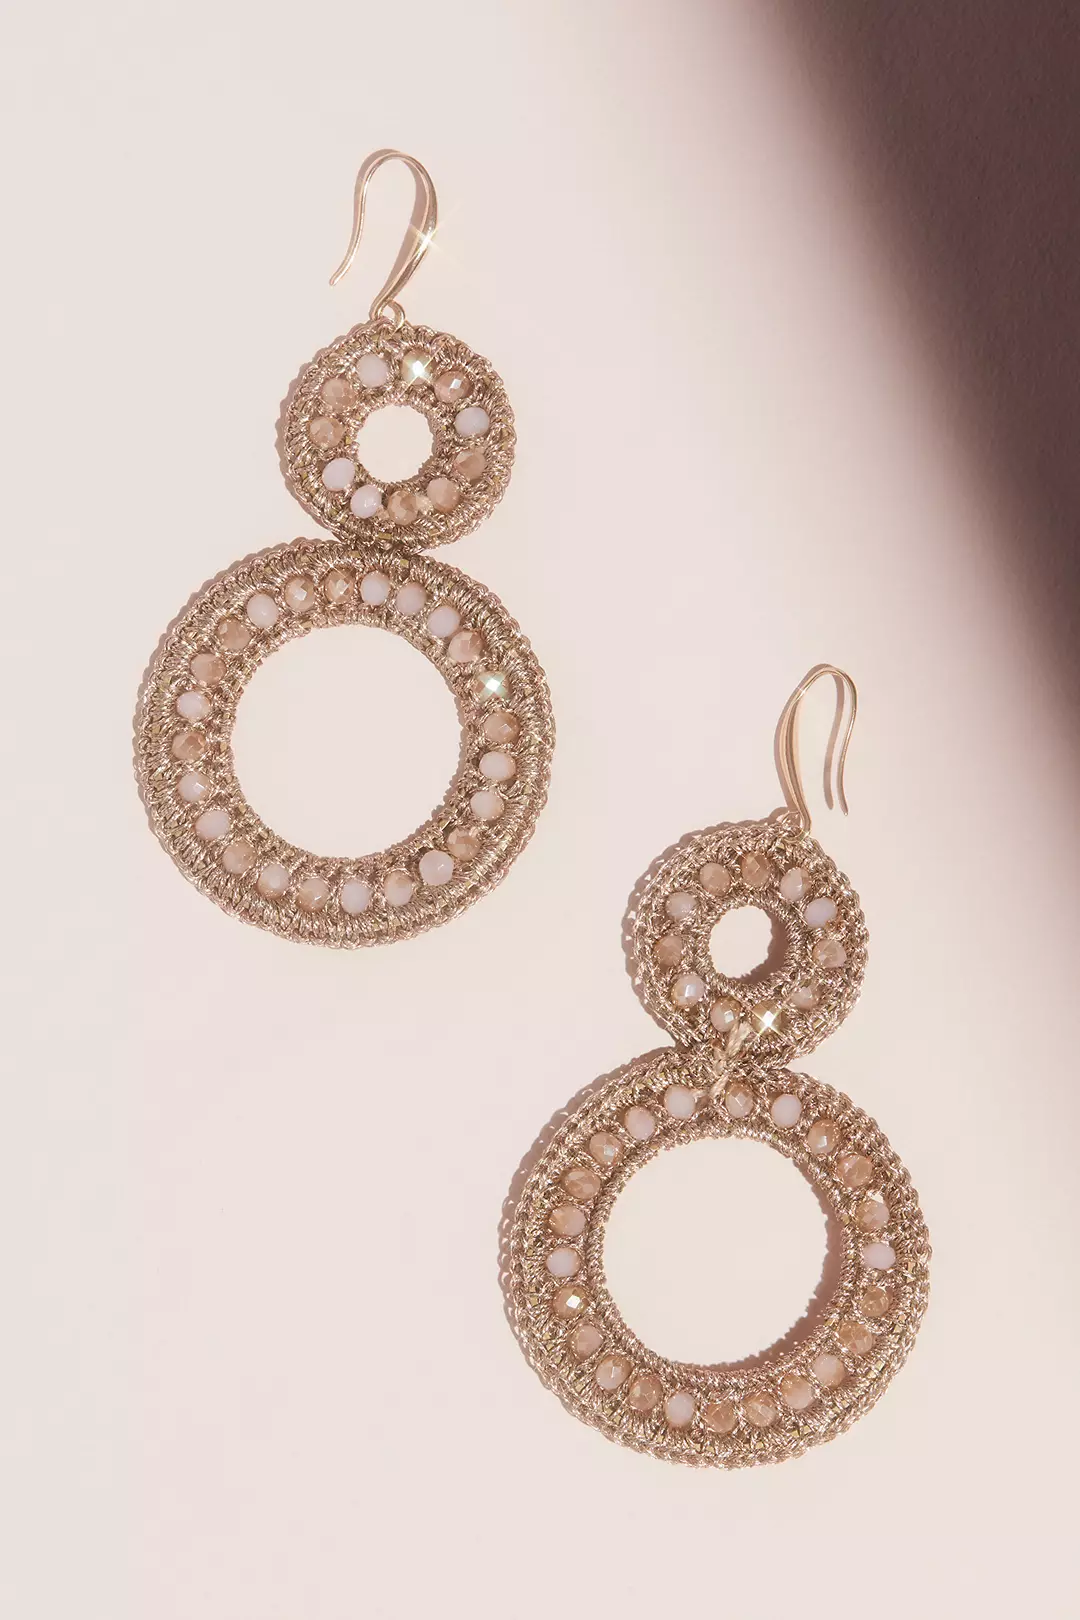 Woven Stacked Circles Drop Earrings Image